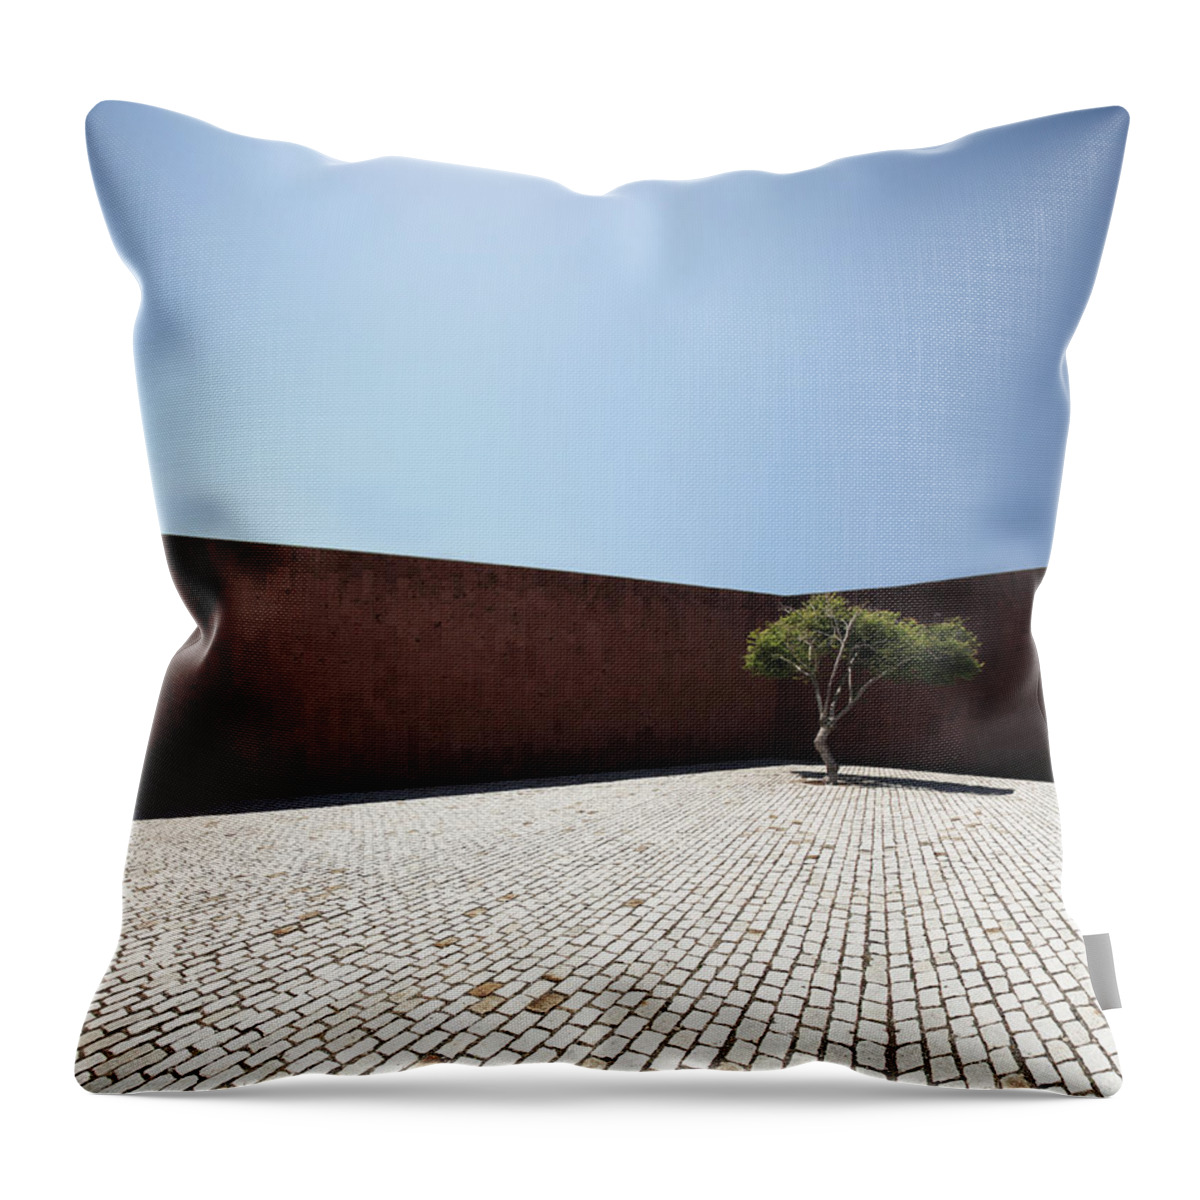 City Throw Pillow featuring the photograph Perspective View On Square With Tree by Stanislaw Pytel